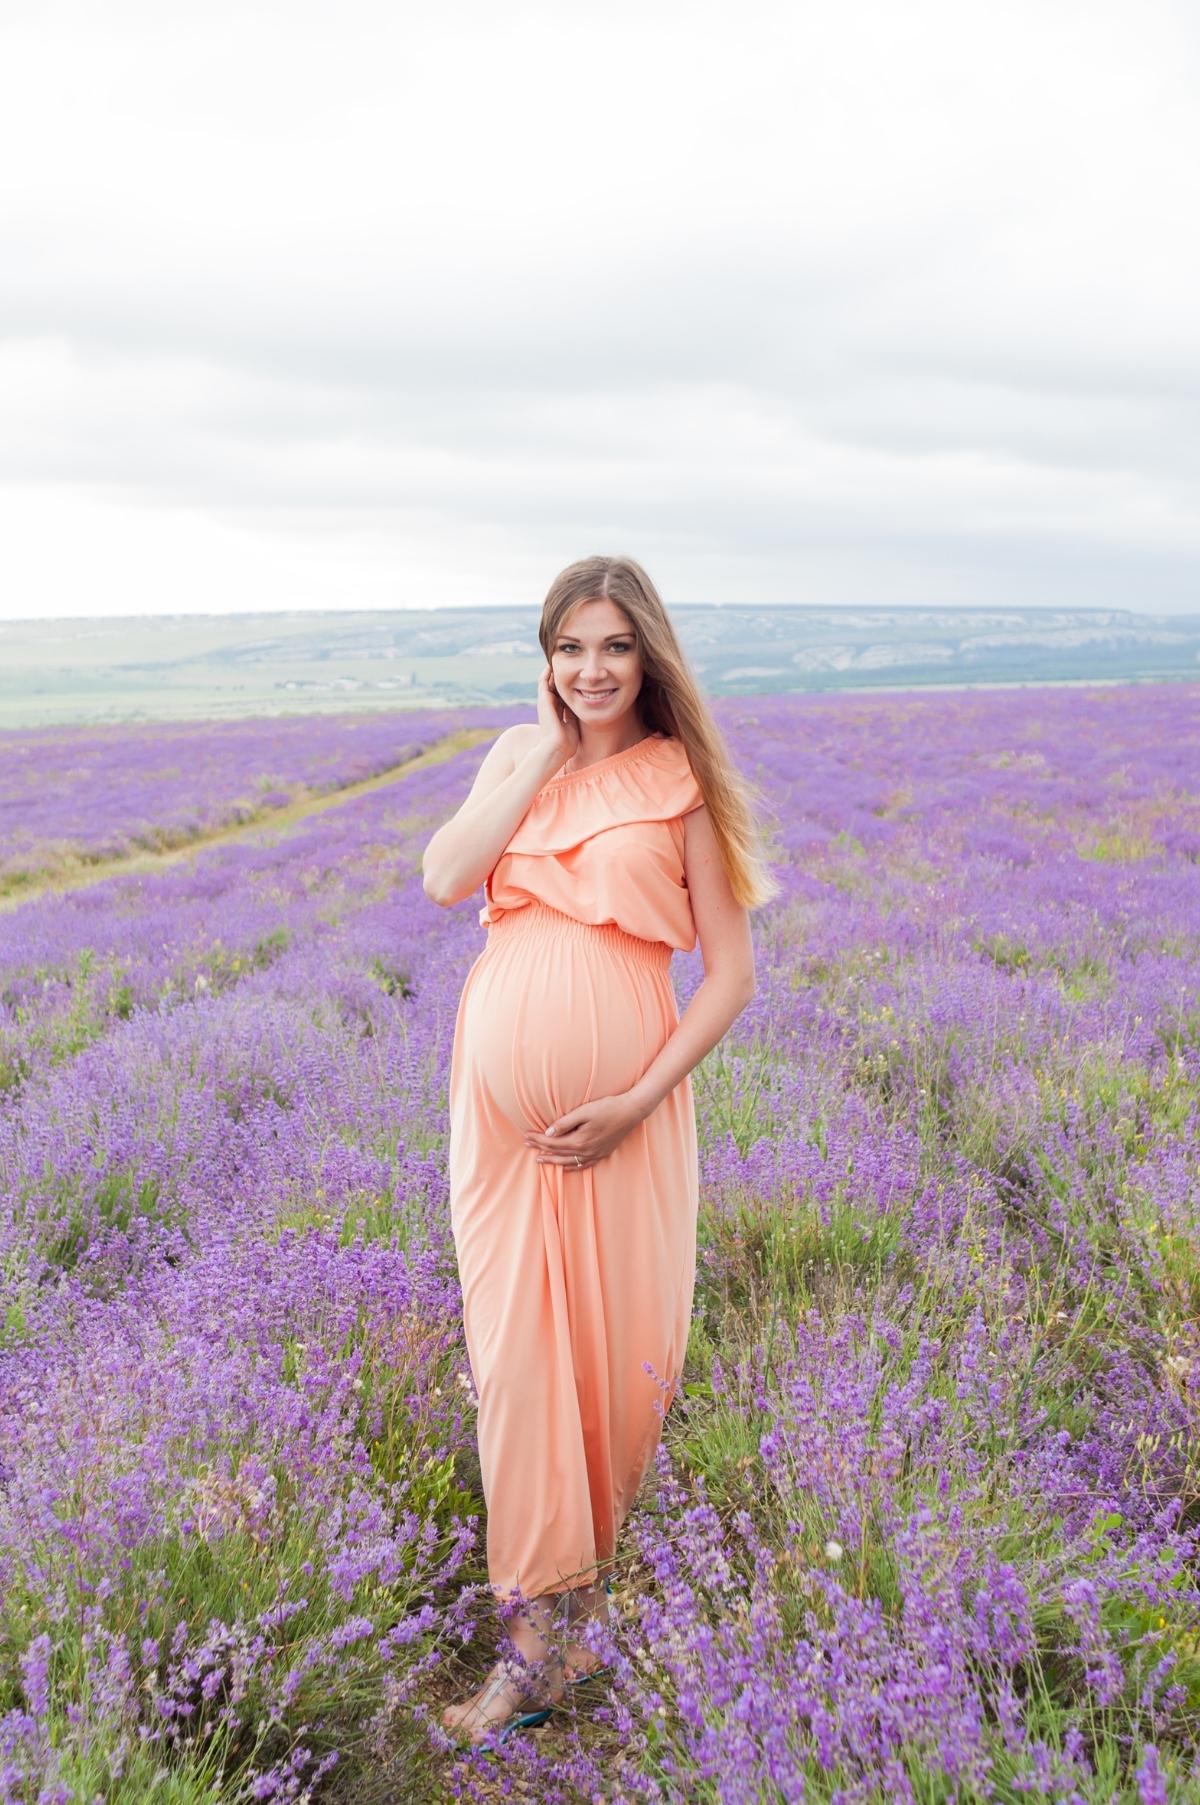 It wasn't until I looked back on my first pregnancy that I realised just how little I knew. I had no idea what I was in for - and I know many women are in the same boat. It can be hard to know where to start! Here are some of the things I wish I knew at the start of my first pregnancy.